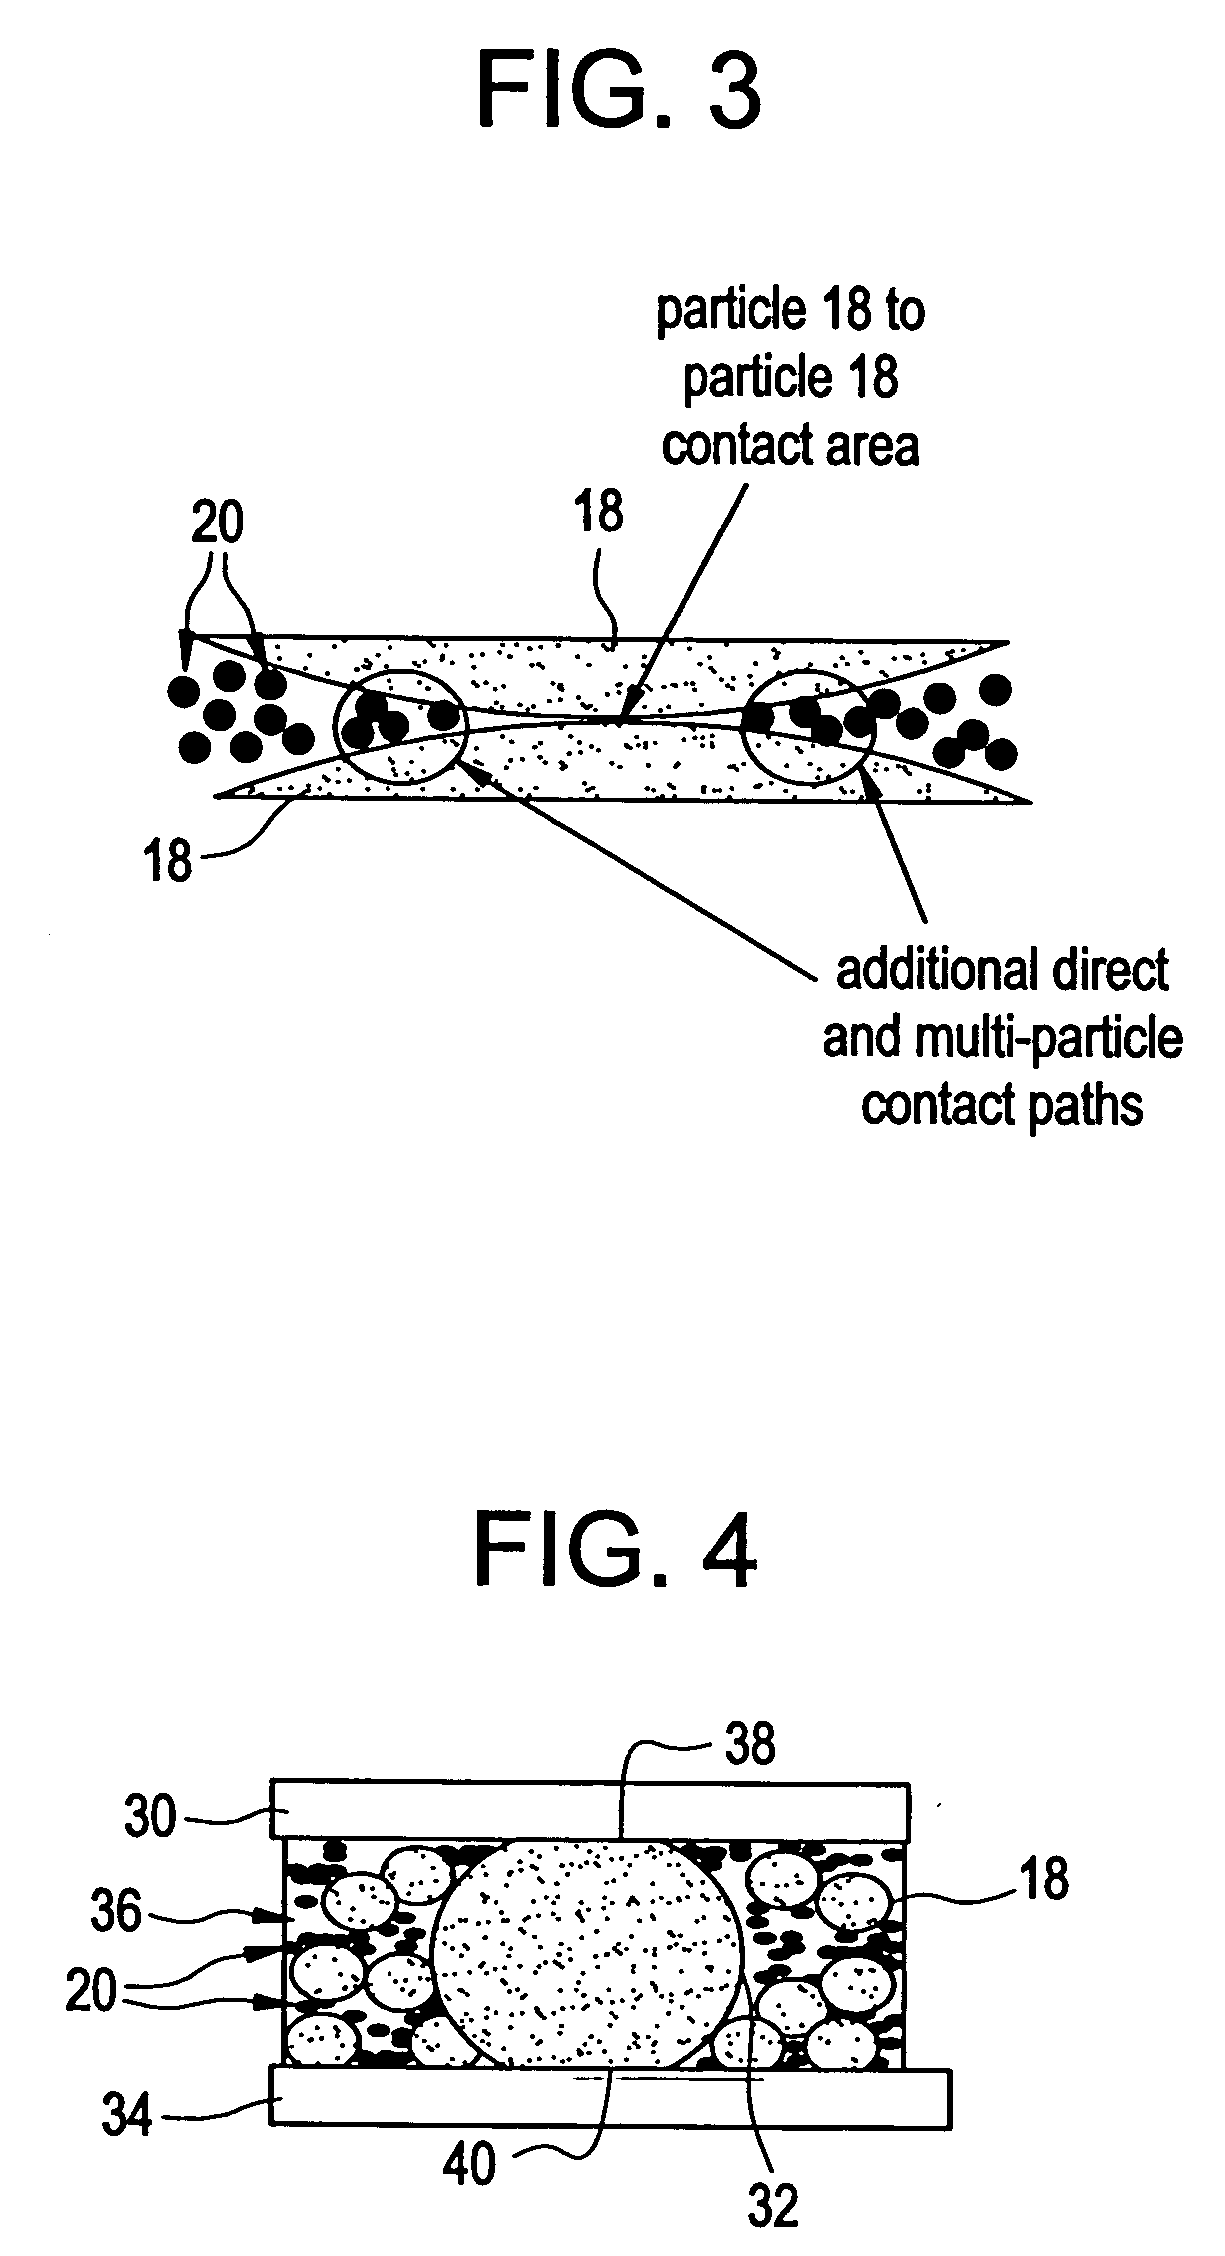 Thermal conductive material utilizing electrically conductive nanoparticles